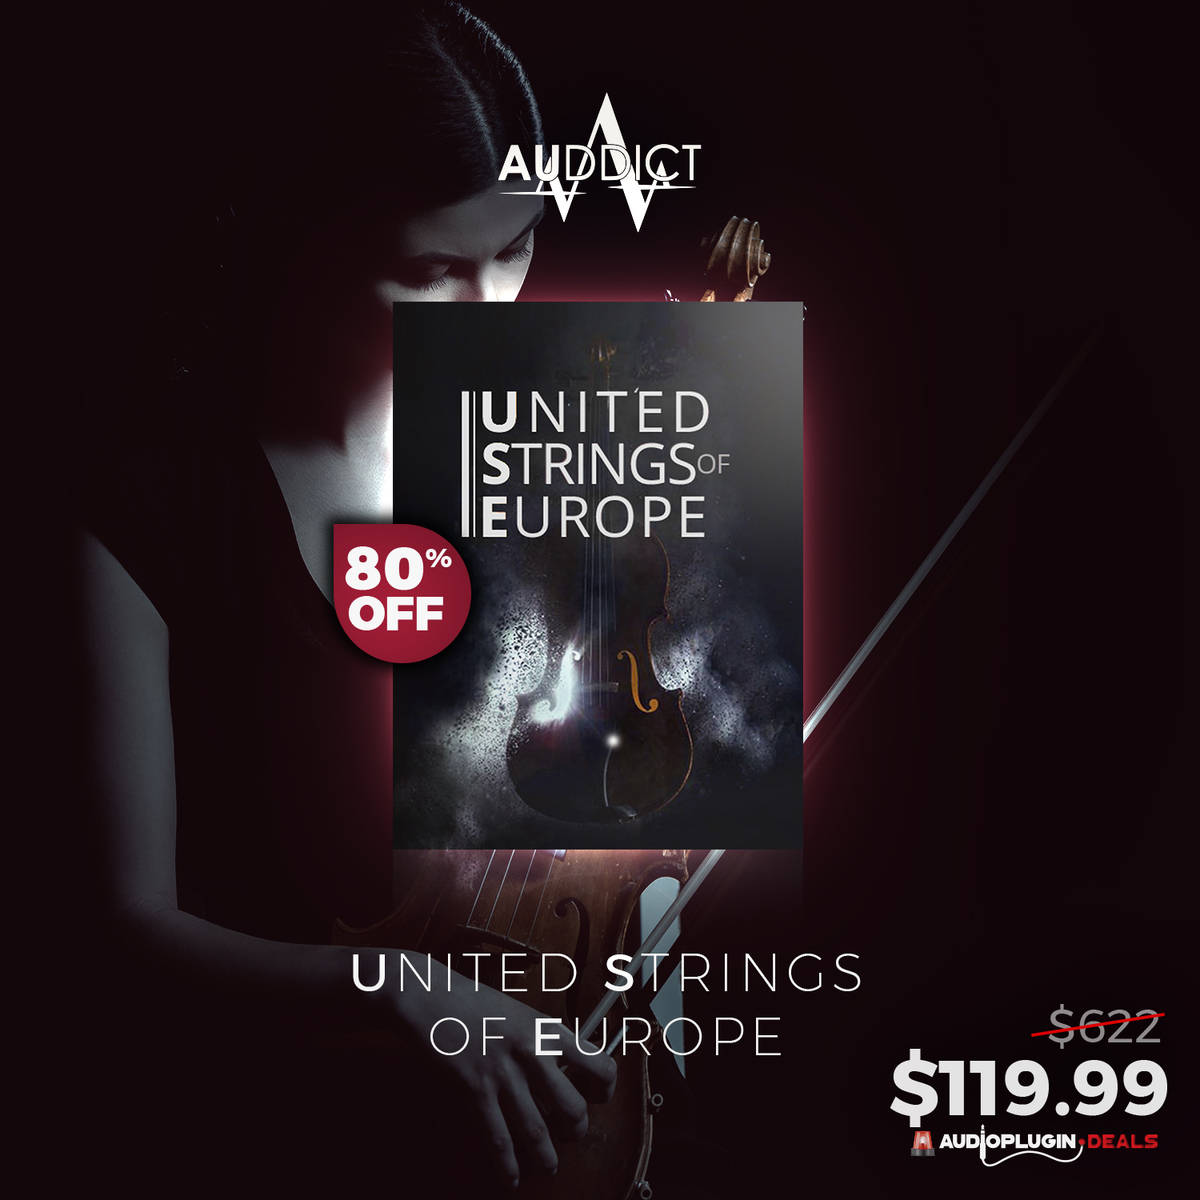 Get (80% OFF) United Strings of Europe by Auddict